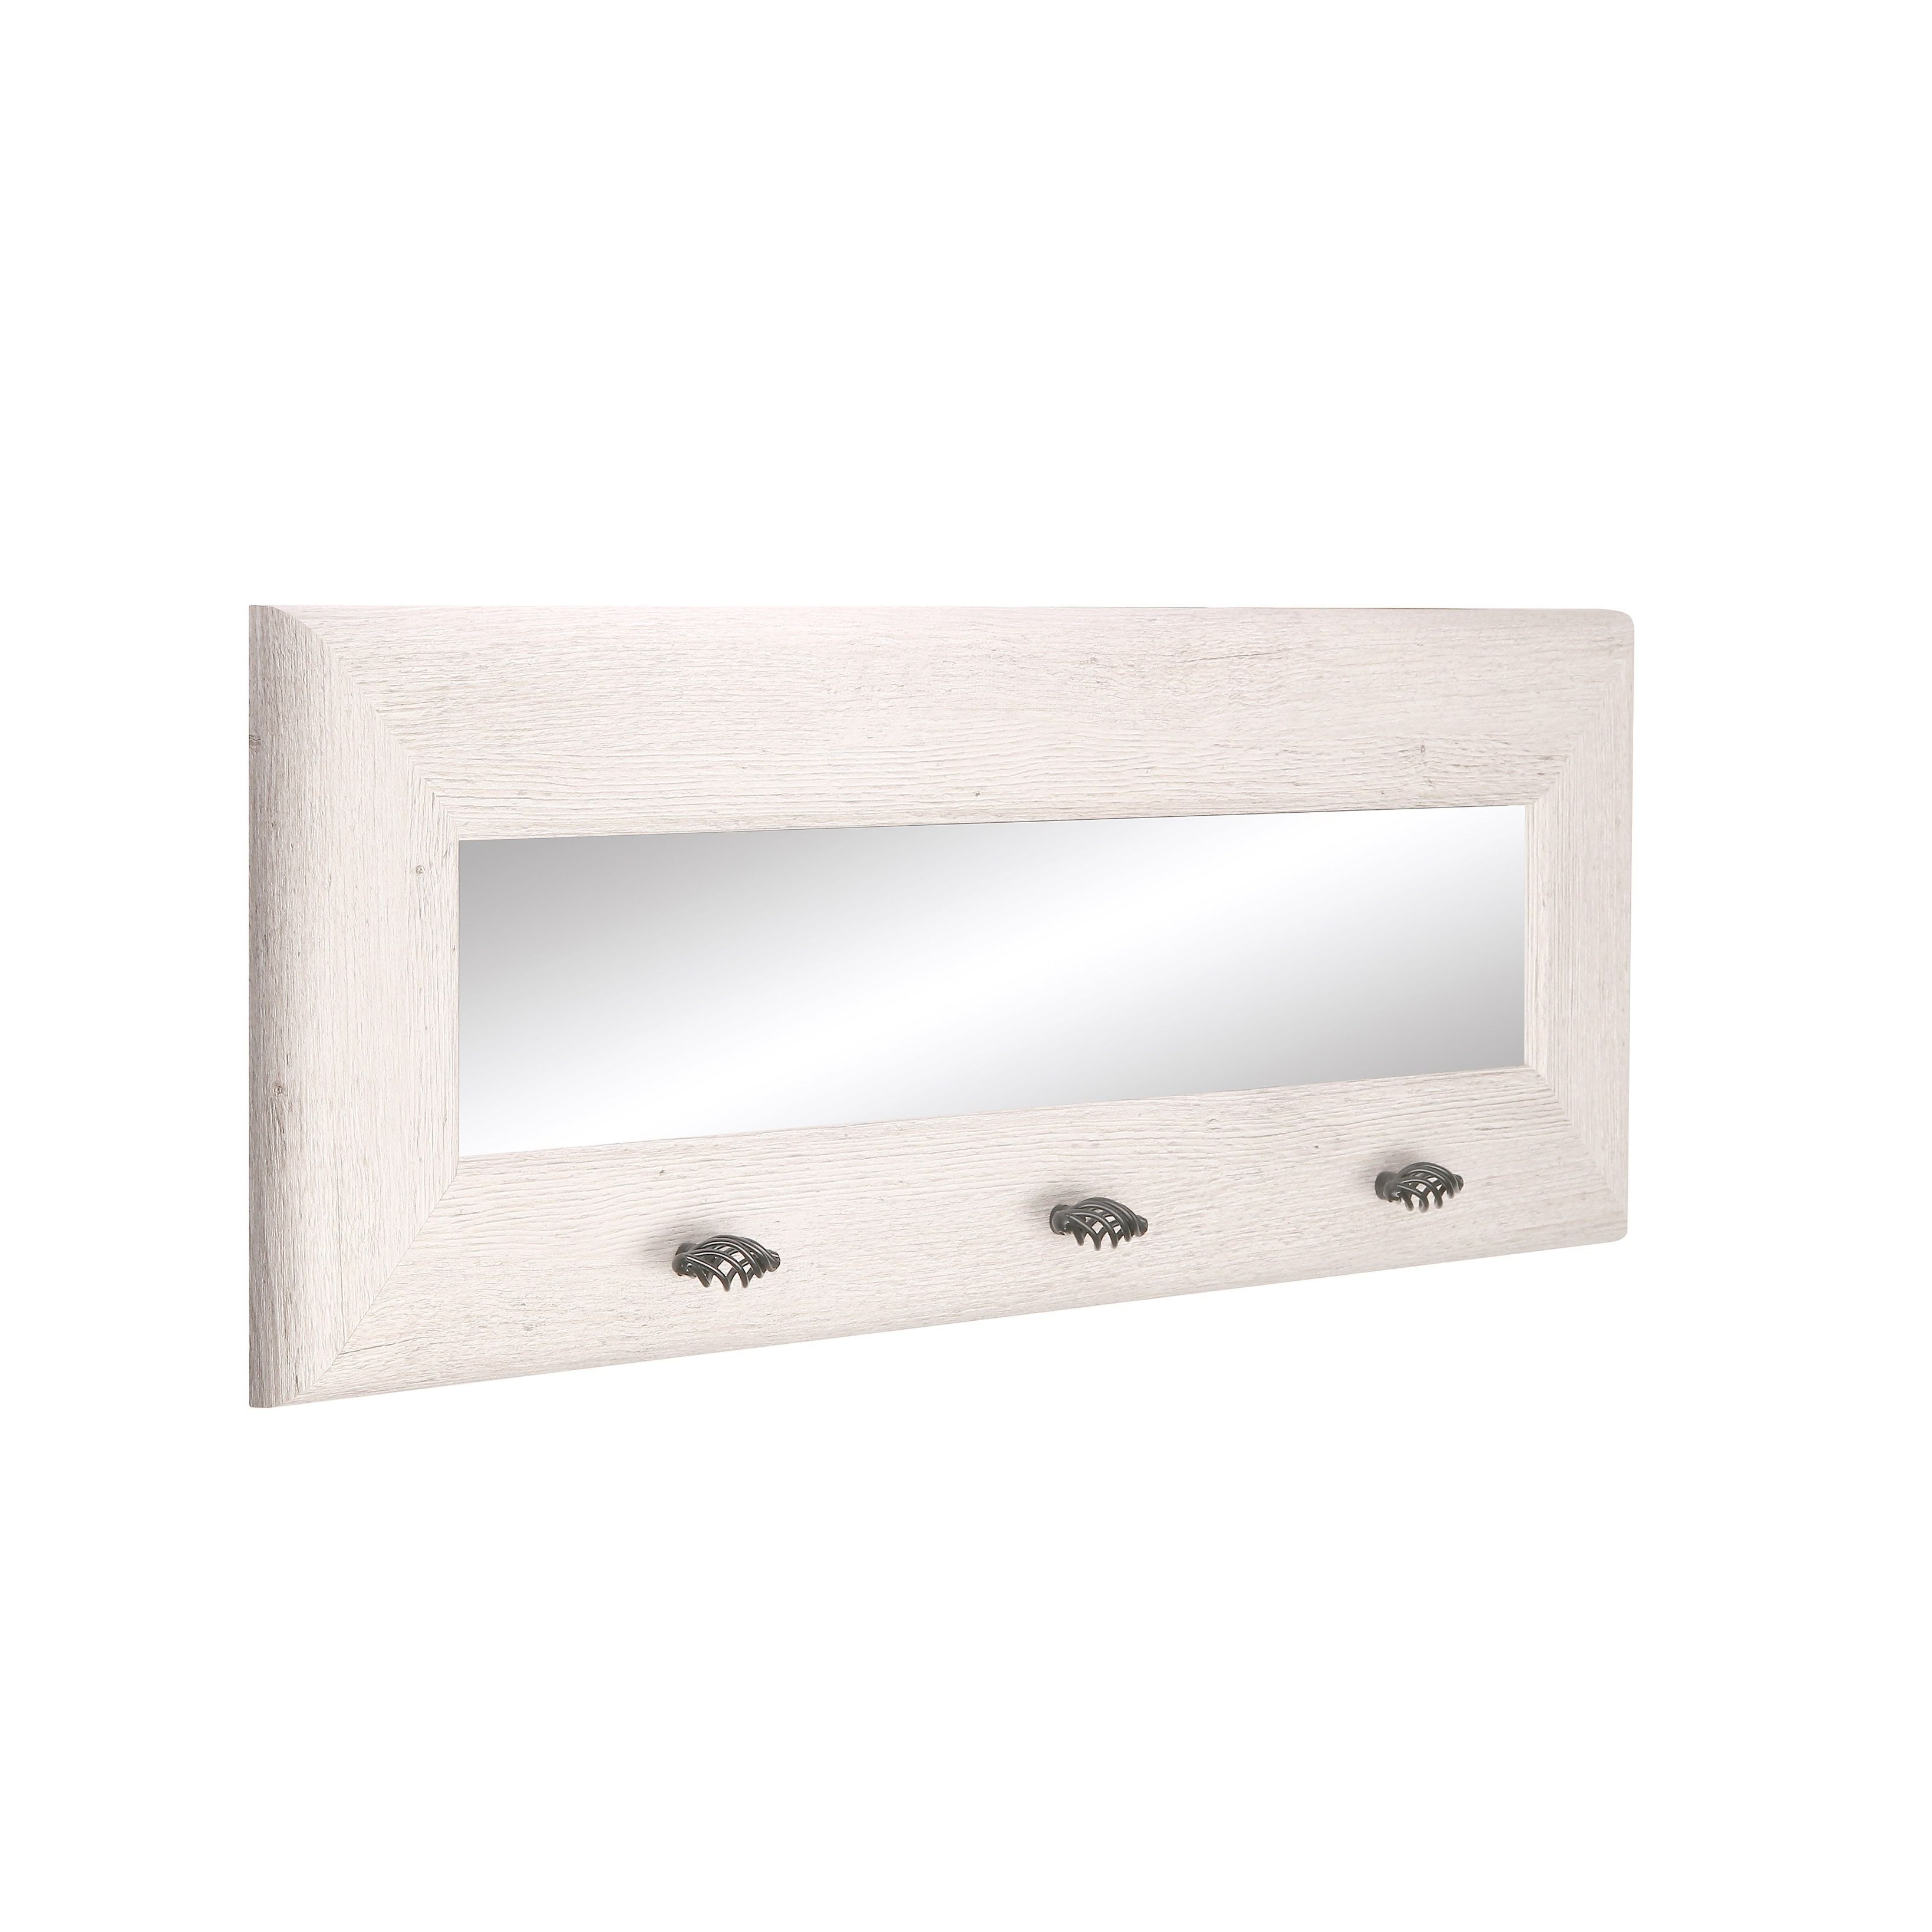 Famous Last Look Wall Mirror With Hooks For Wall Mirrors With Hooks (View 18 of 20)